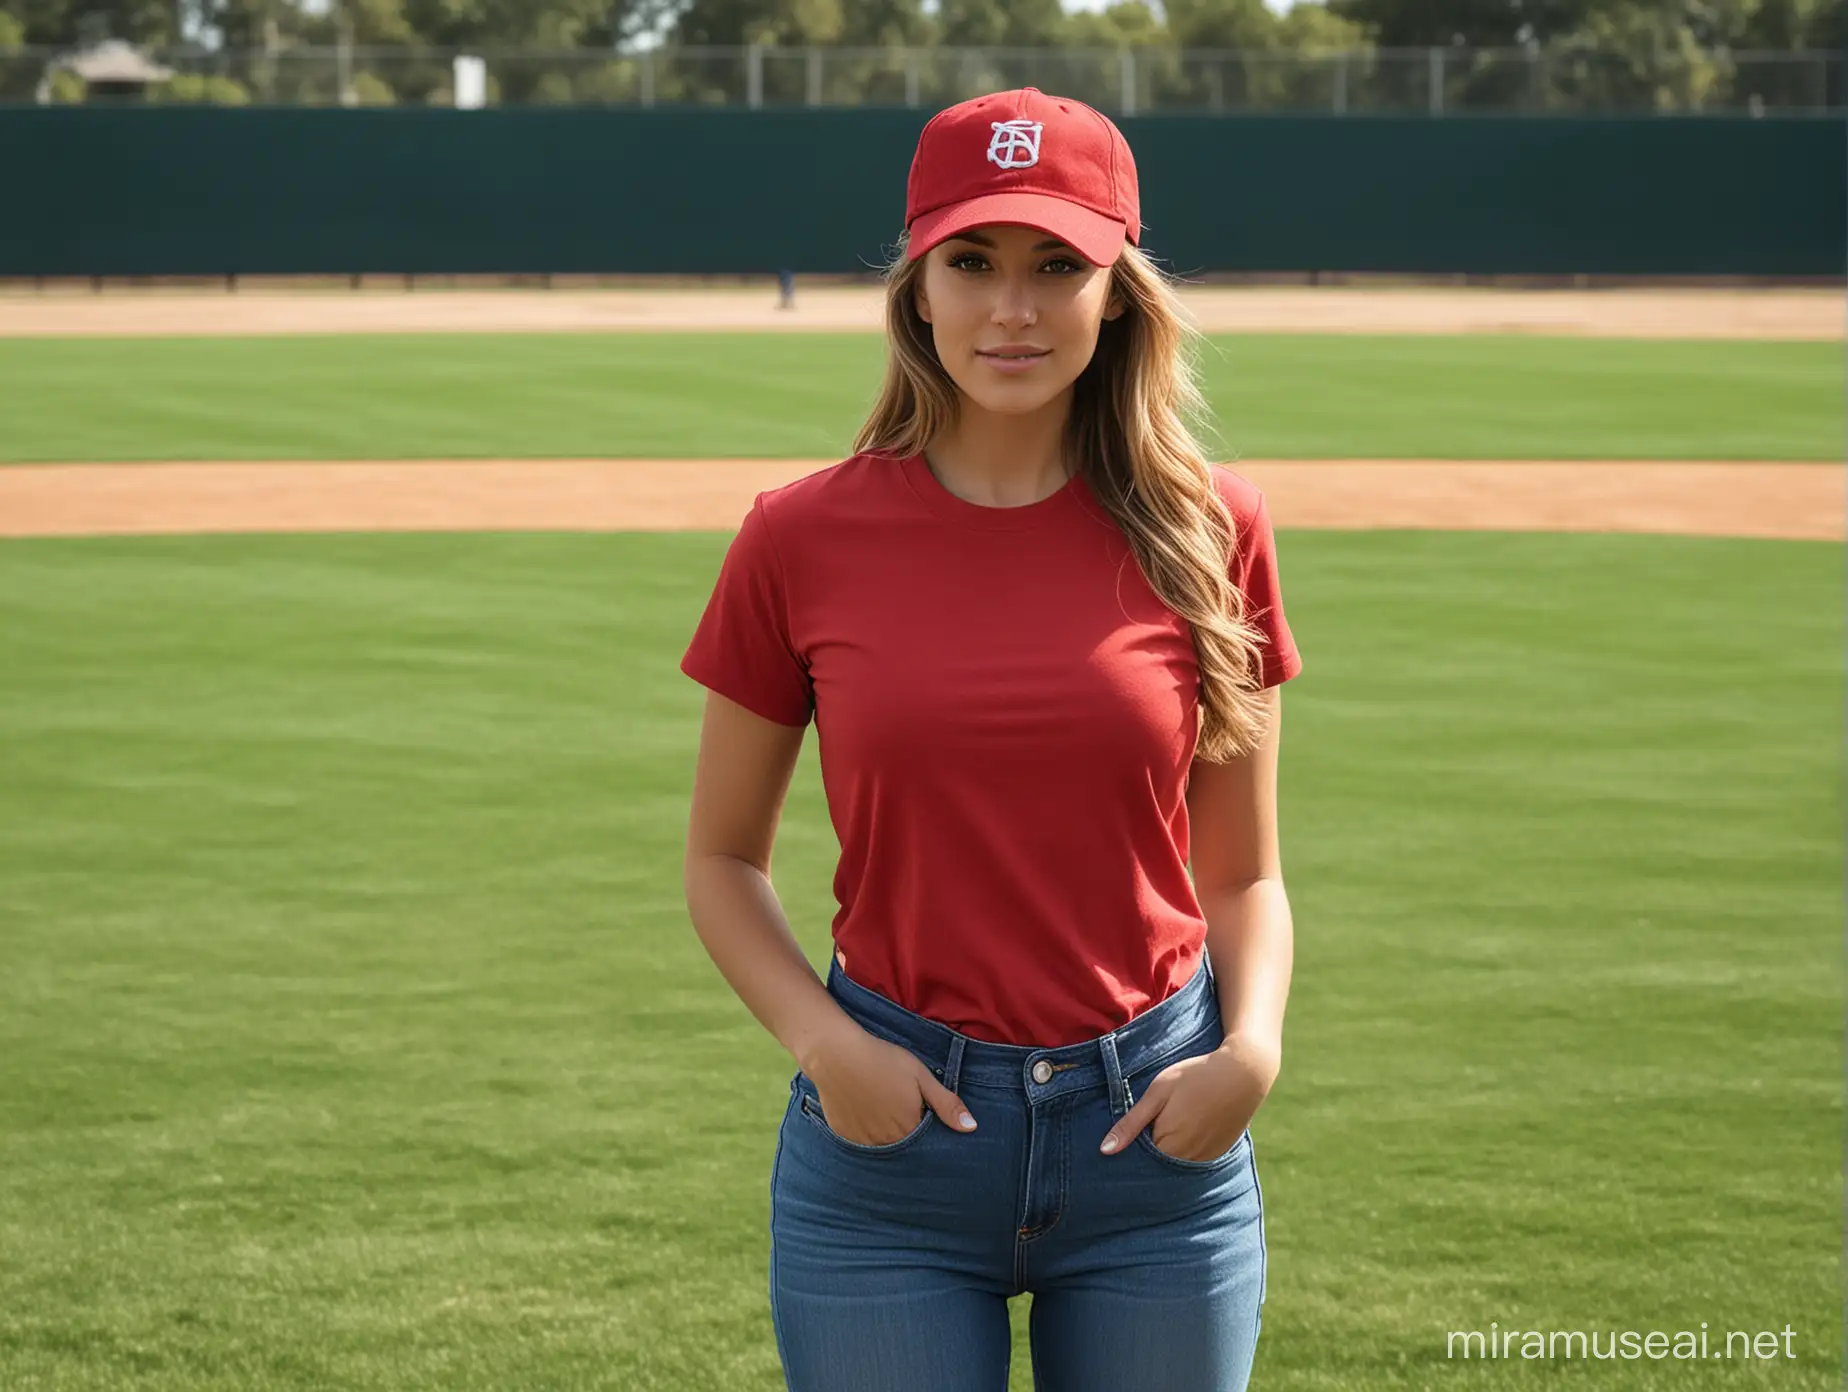 Create an image of a beautiful women wearing a blank red t shirt and a baseball cap and blue jeans. She is outside on the baseball field. 